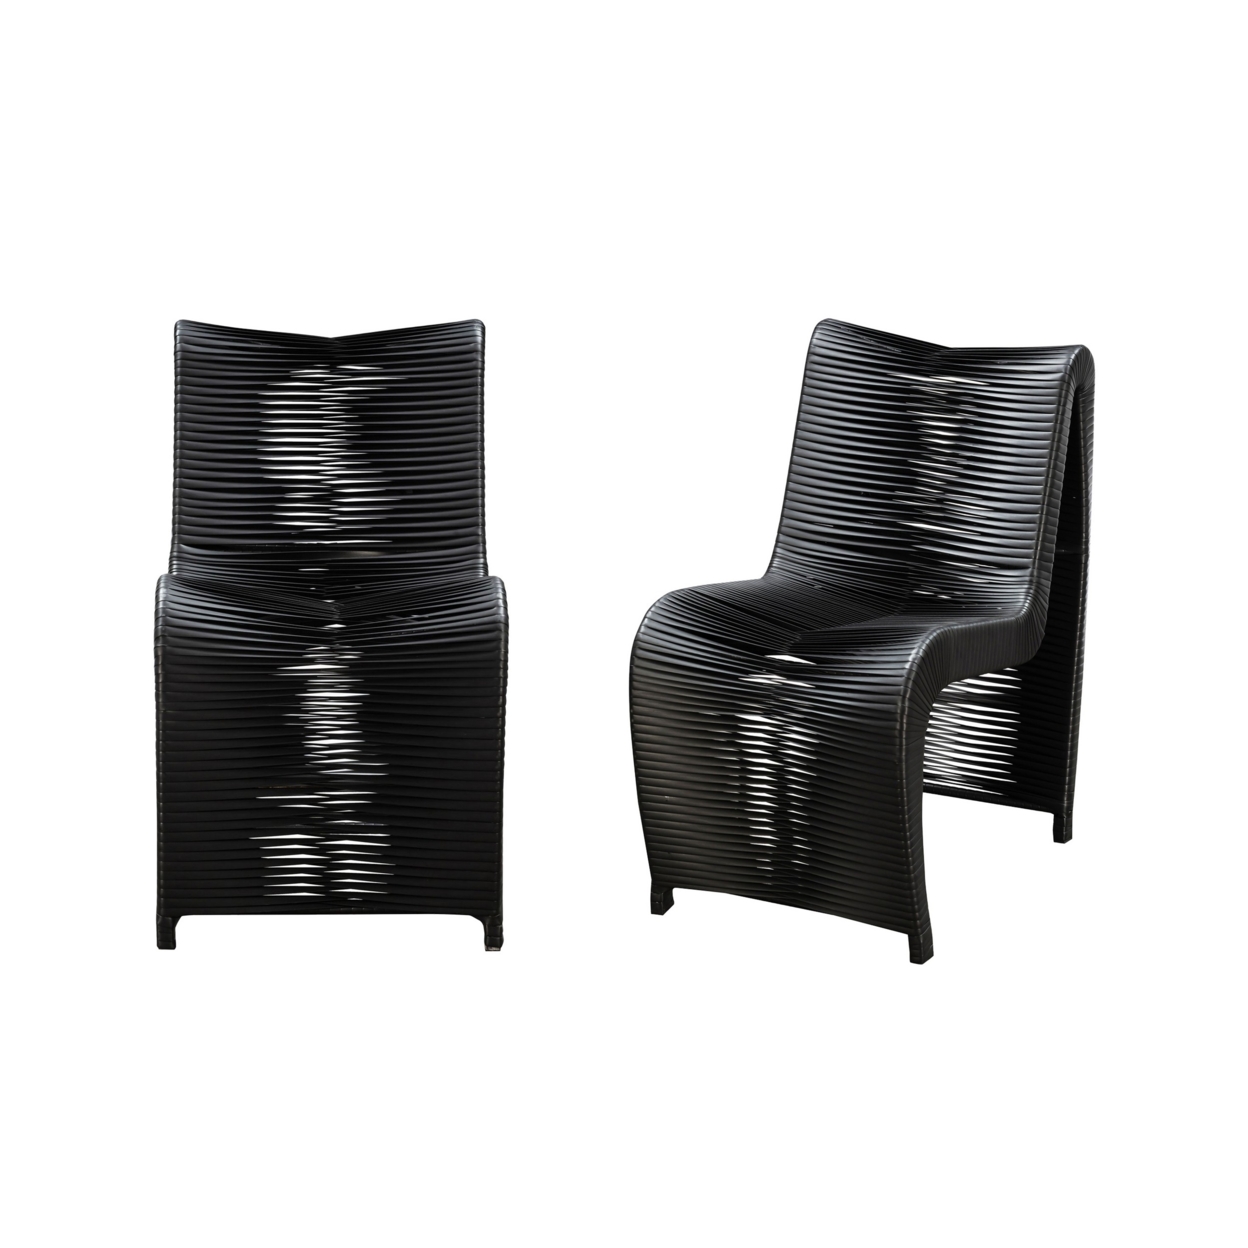 Hale 34 Inch Set Of 2 Outdoor Patio Chairs With Rattan Plastic Frame, Black - Saltoro Sherpi